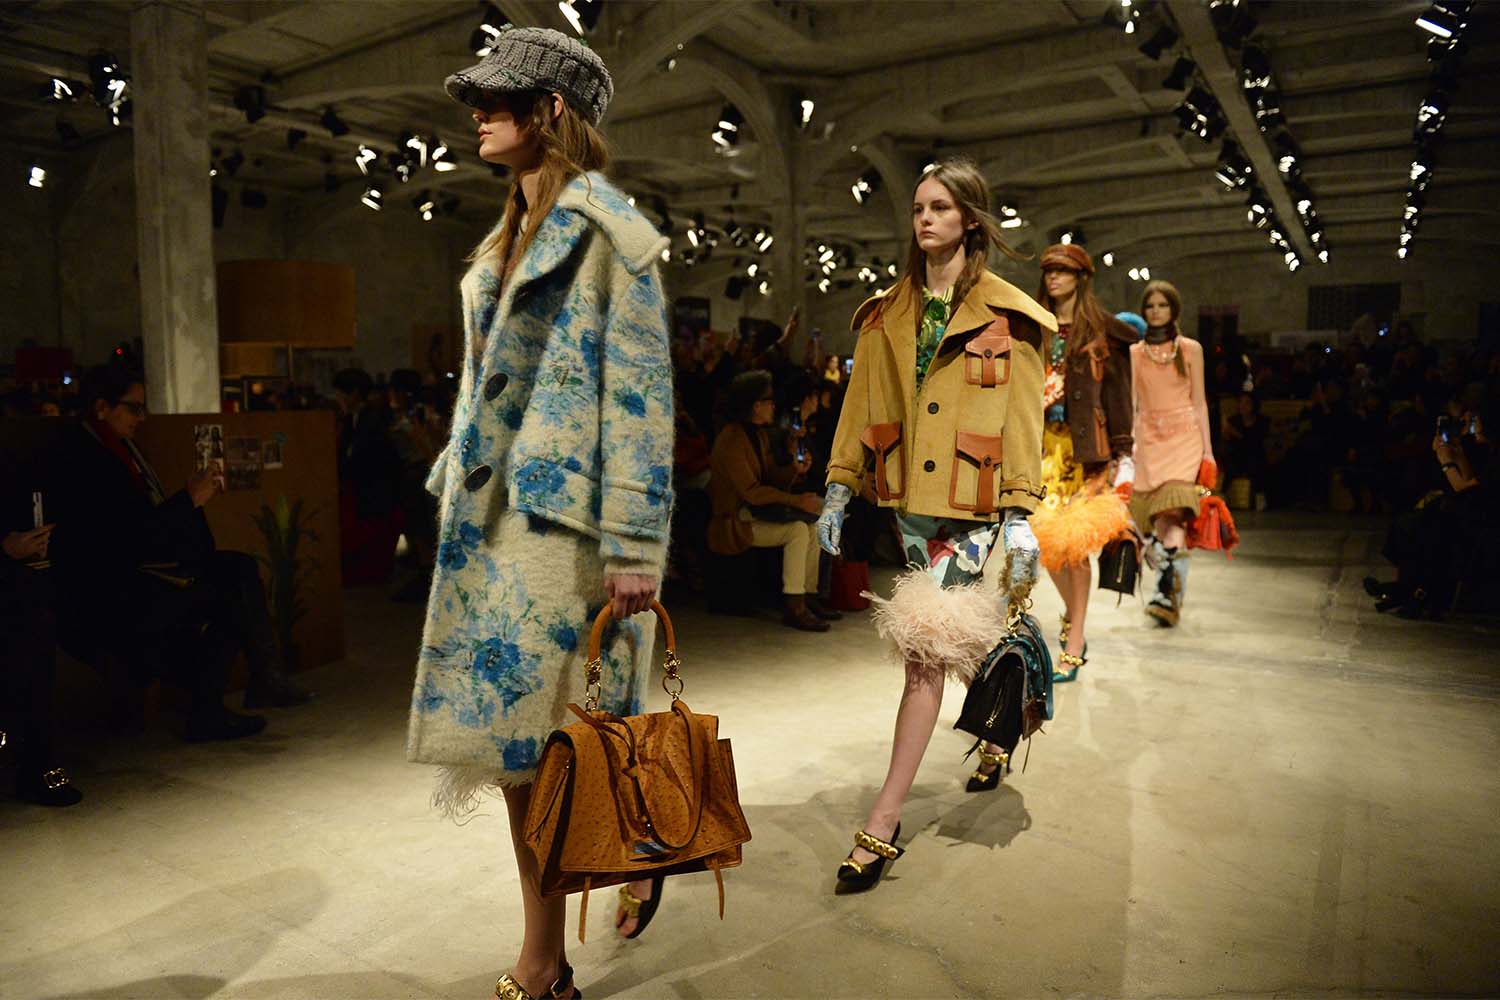 Weekly Fashion Digest: Prada Goes Fur Free And Tiffany & Co. Updates The Engagement Ring